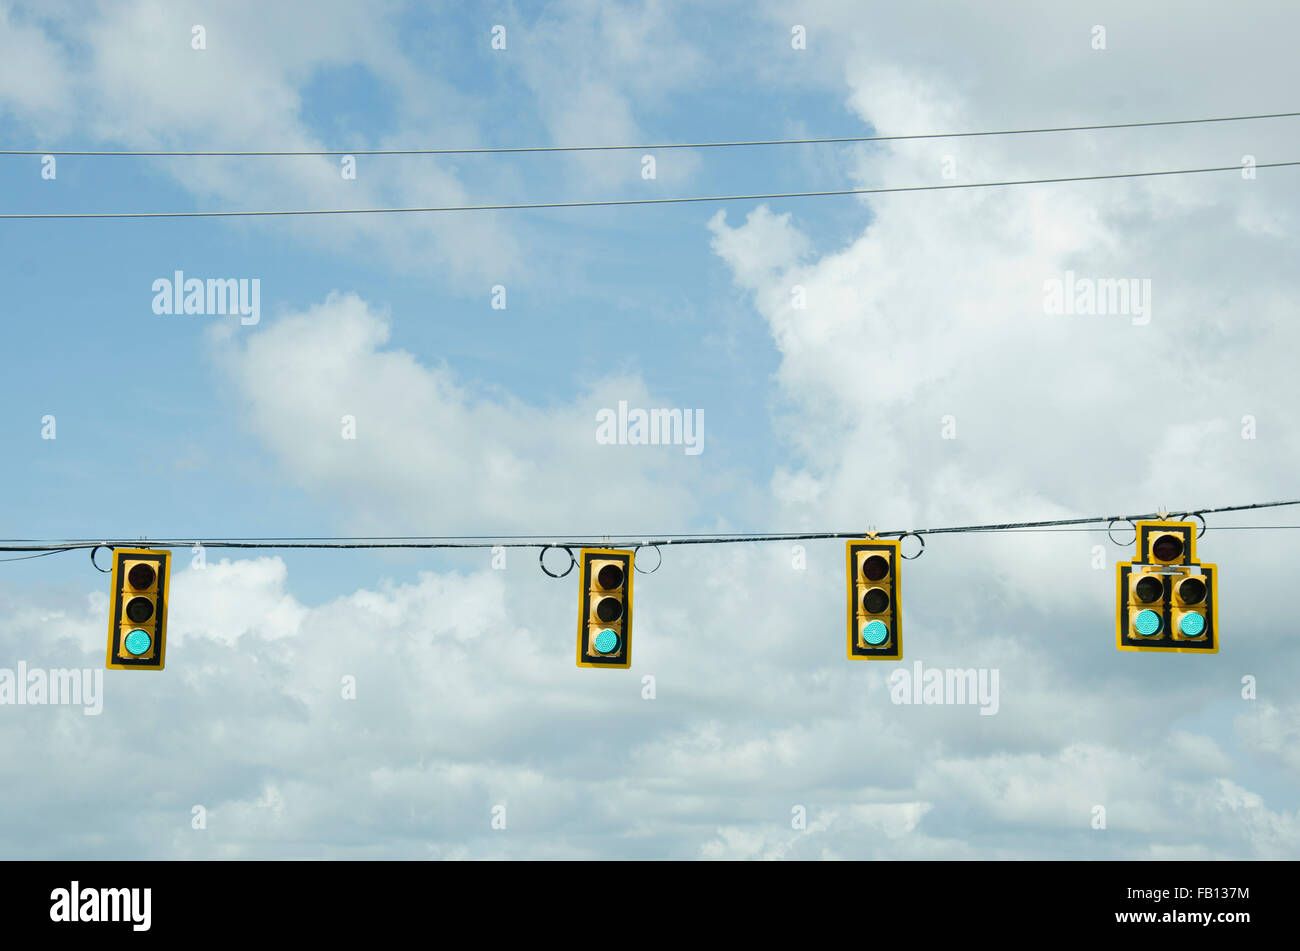 Road signals on cable against cloudy sky Stock Photo